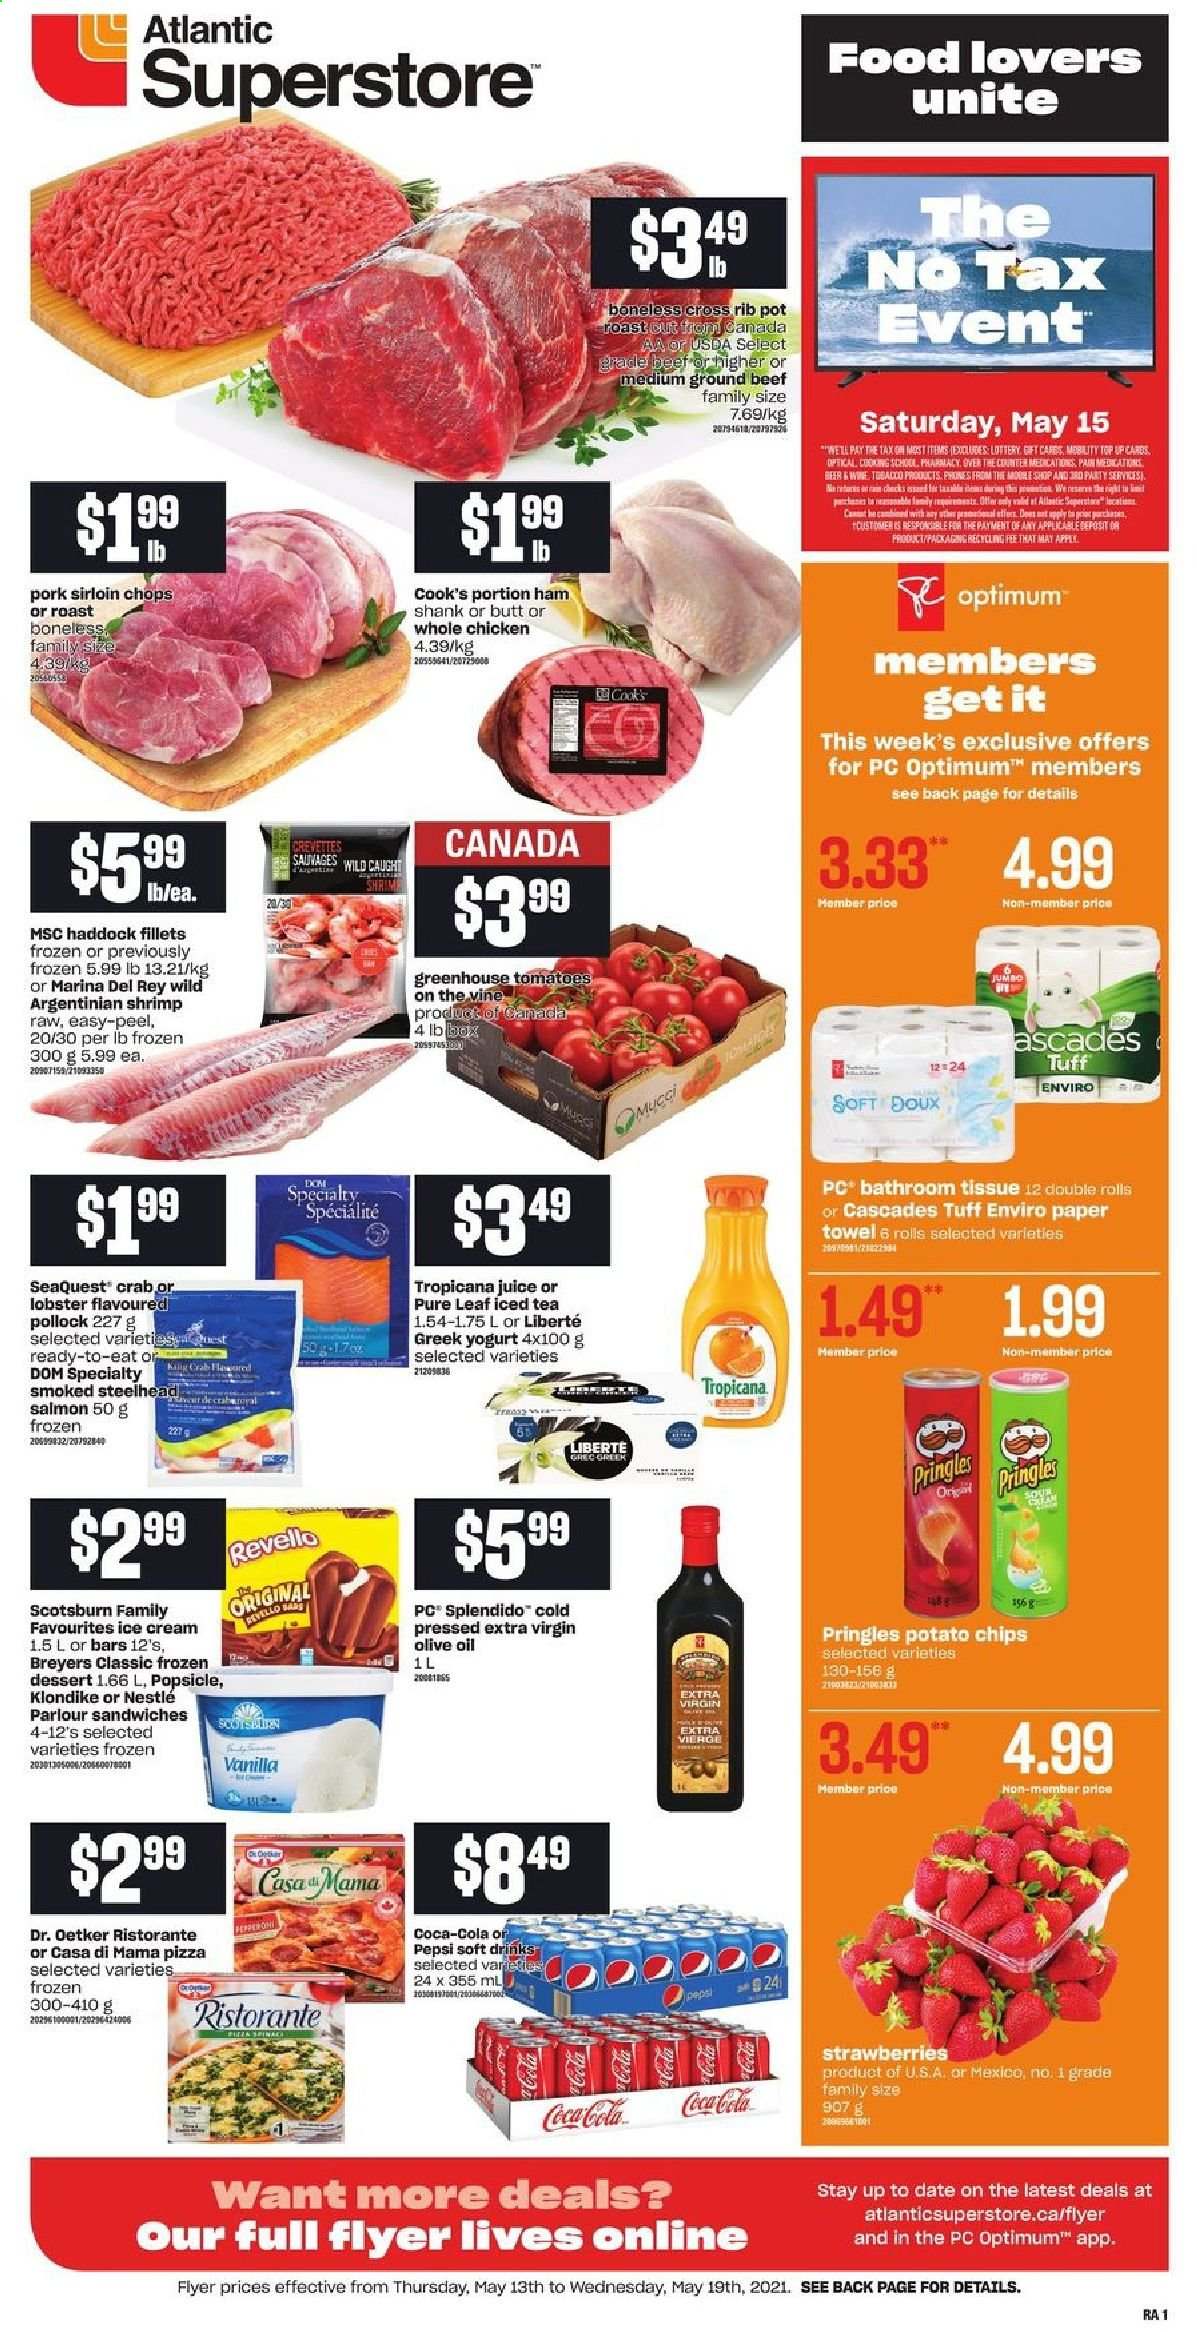 Atlantic Superstore flyer  - May 13, 2021 - May 19, 2021. Page 1.